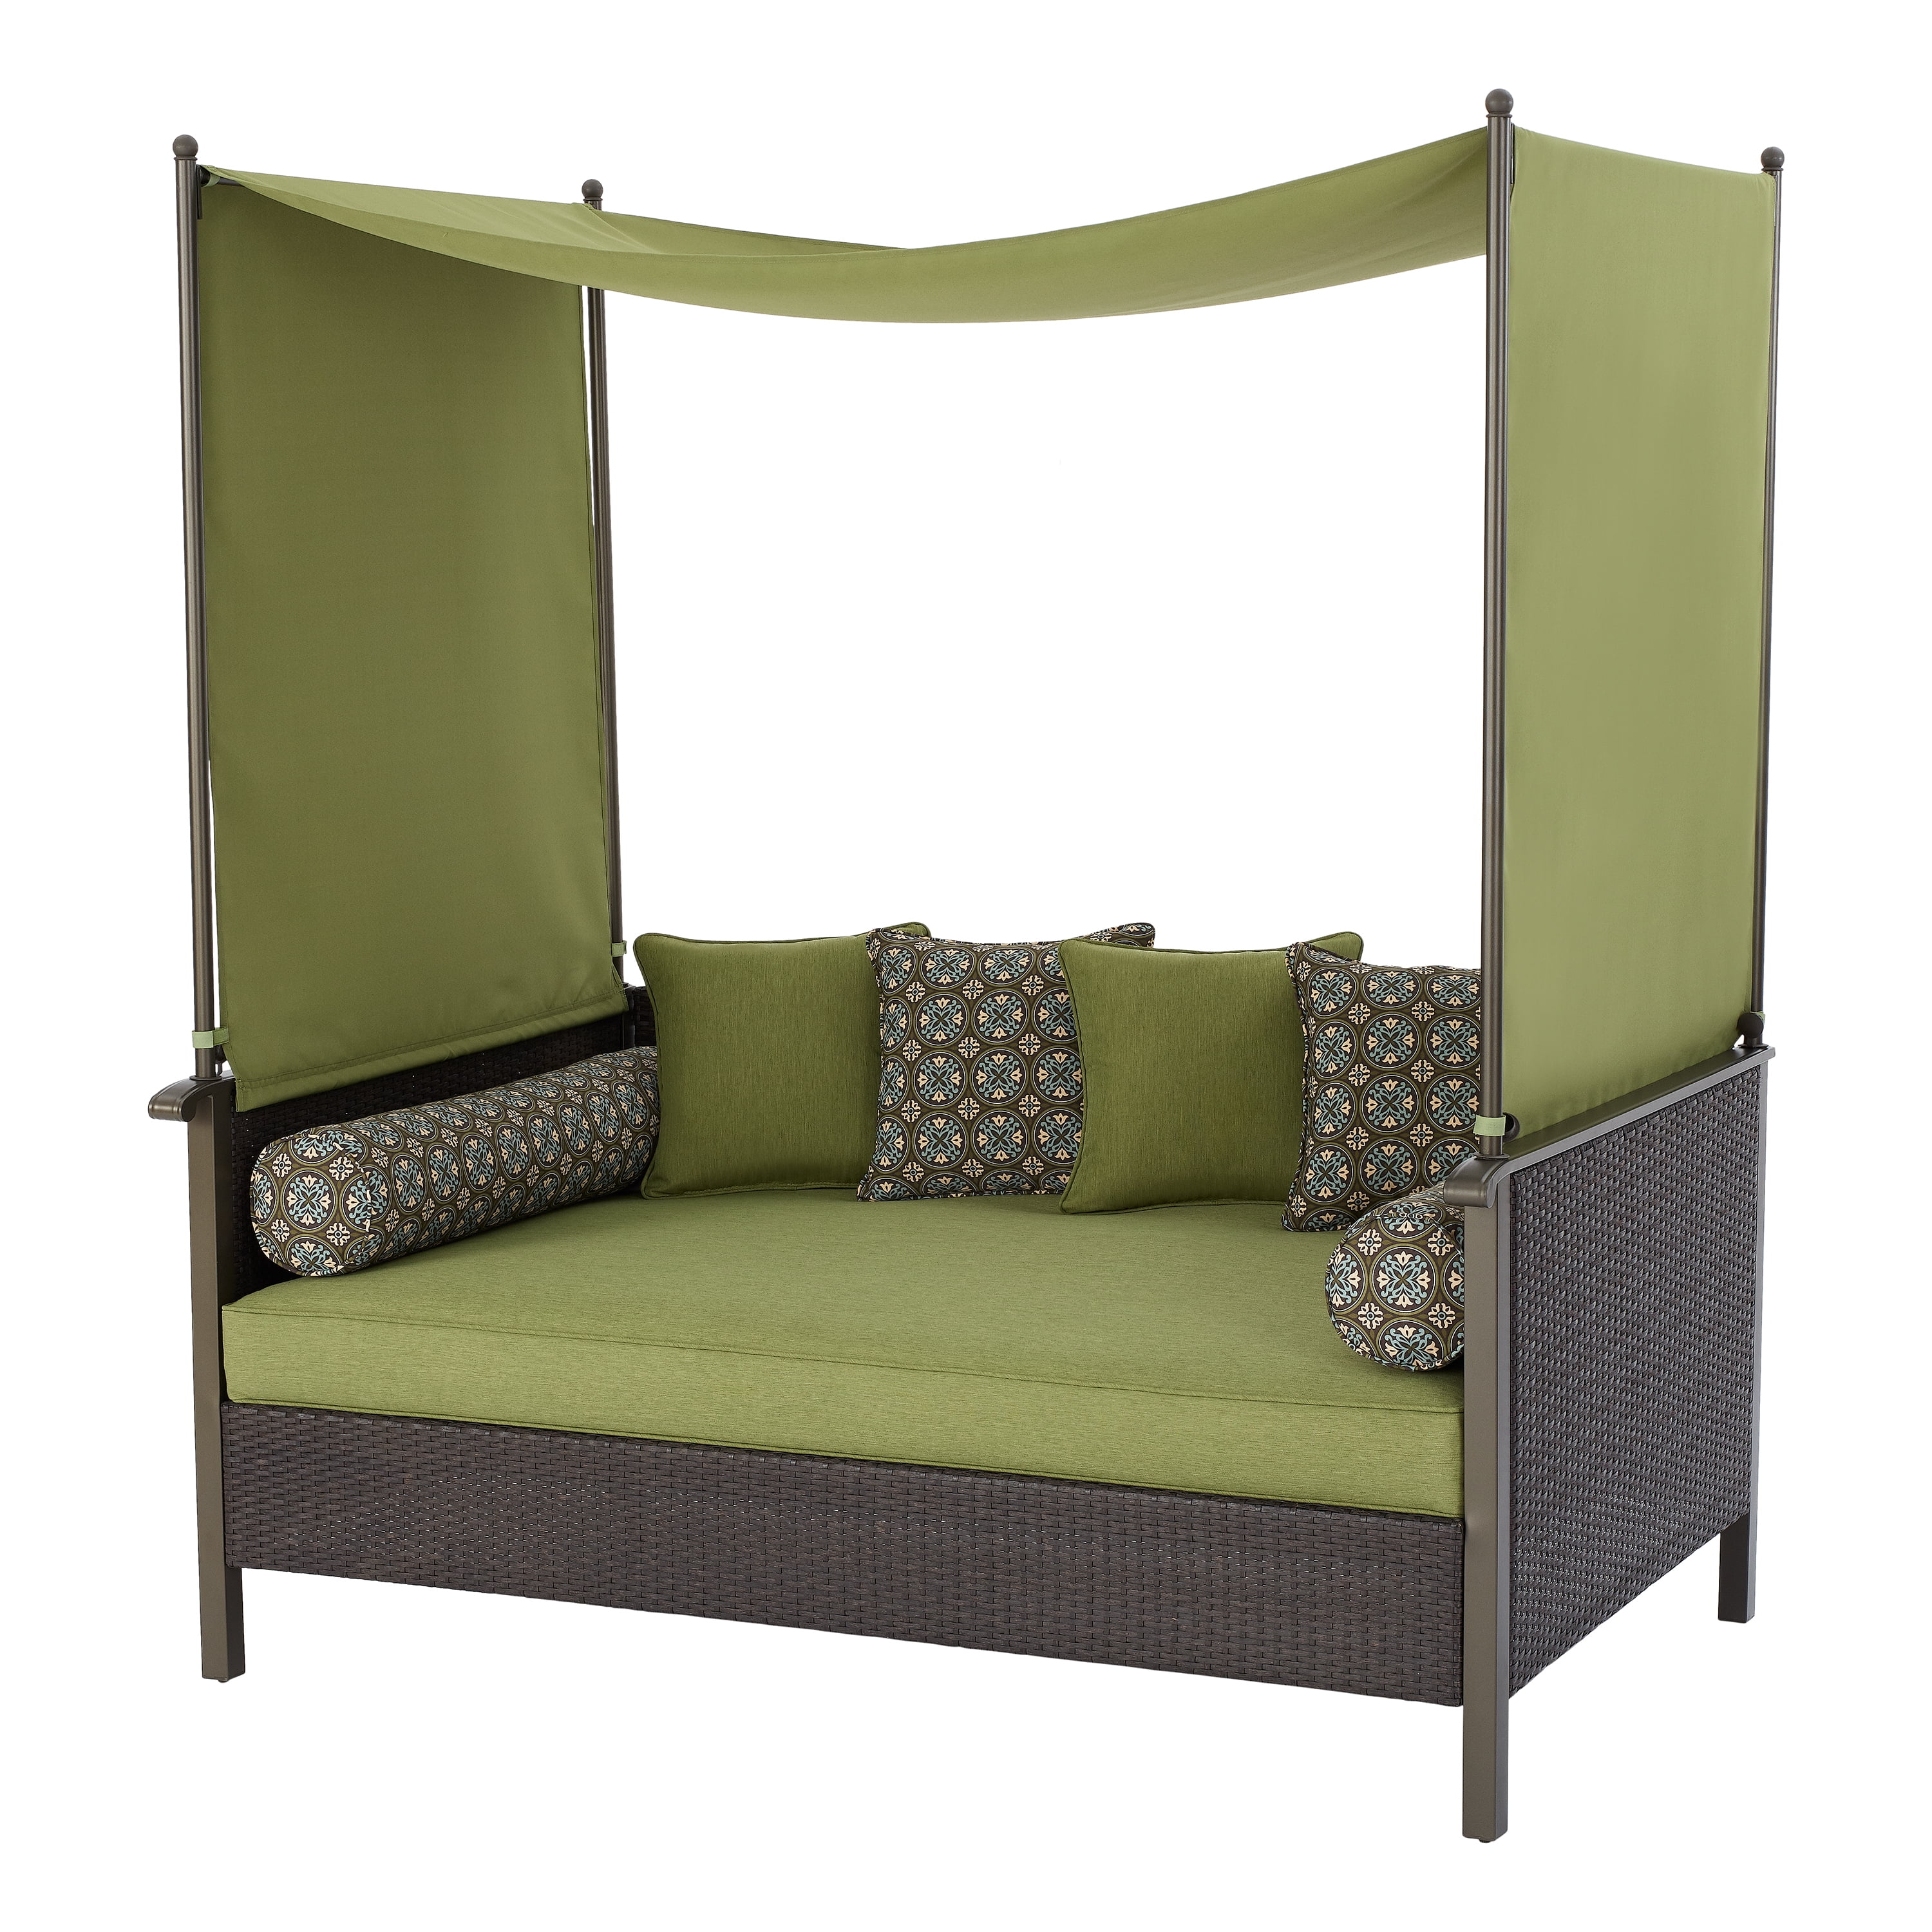 Gardens Providence Outdoor Daybed, Outdoor Daybeds With Canopy